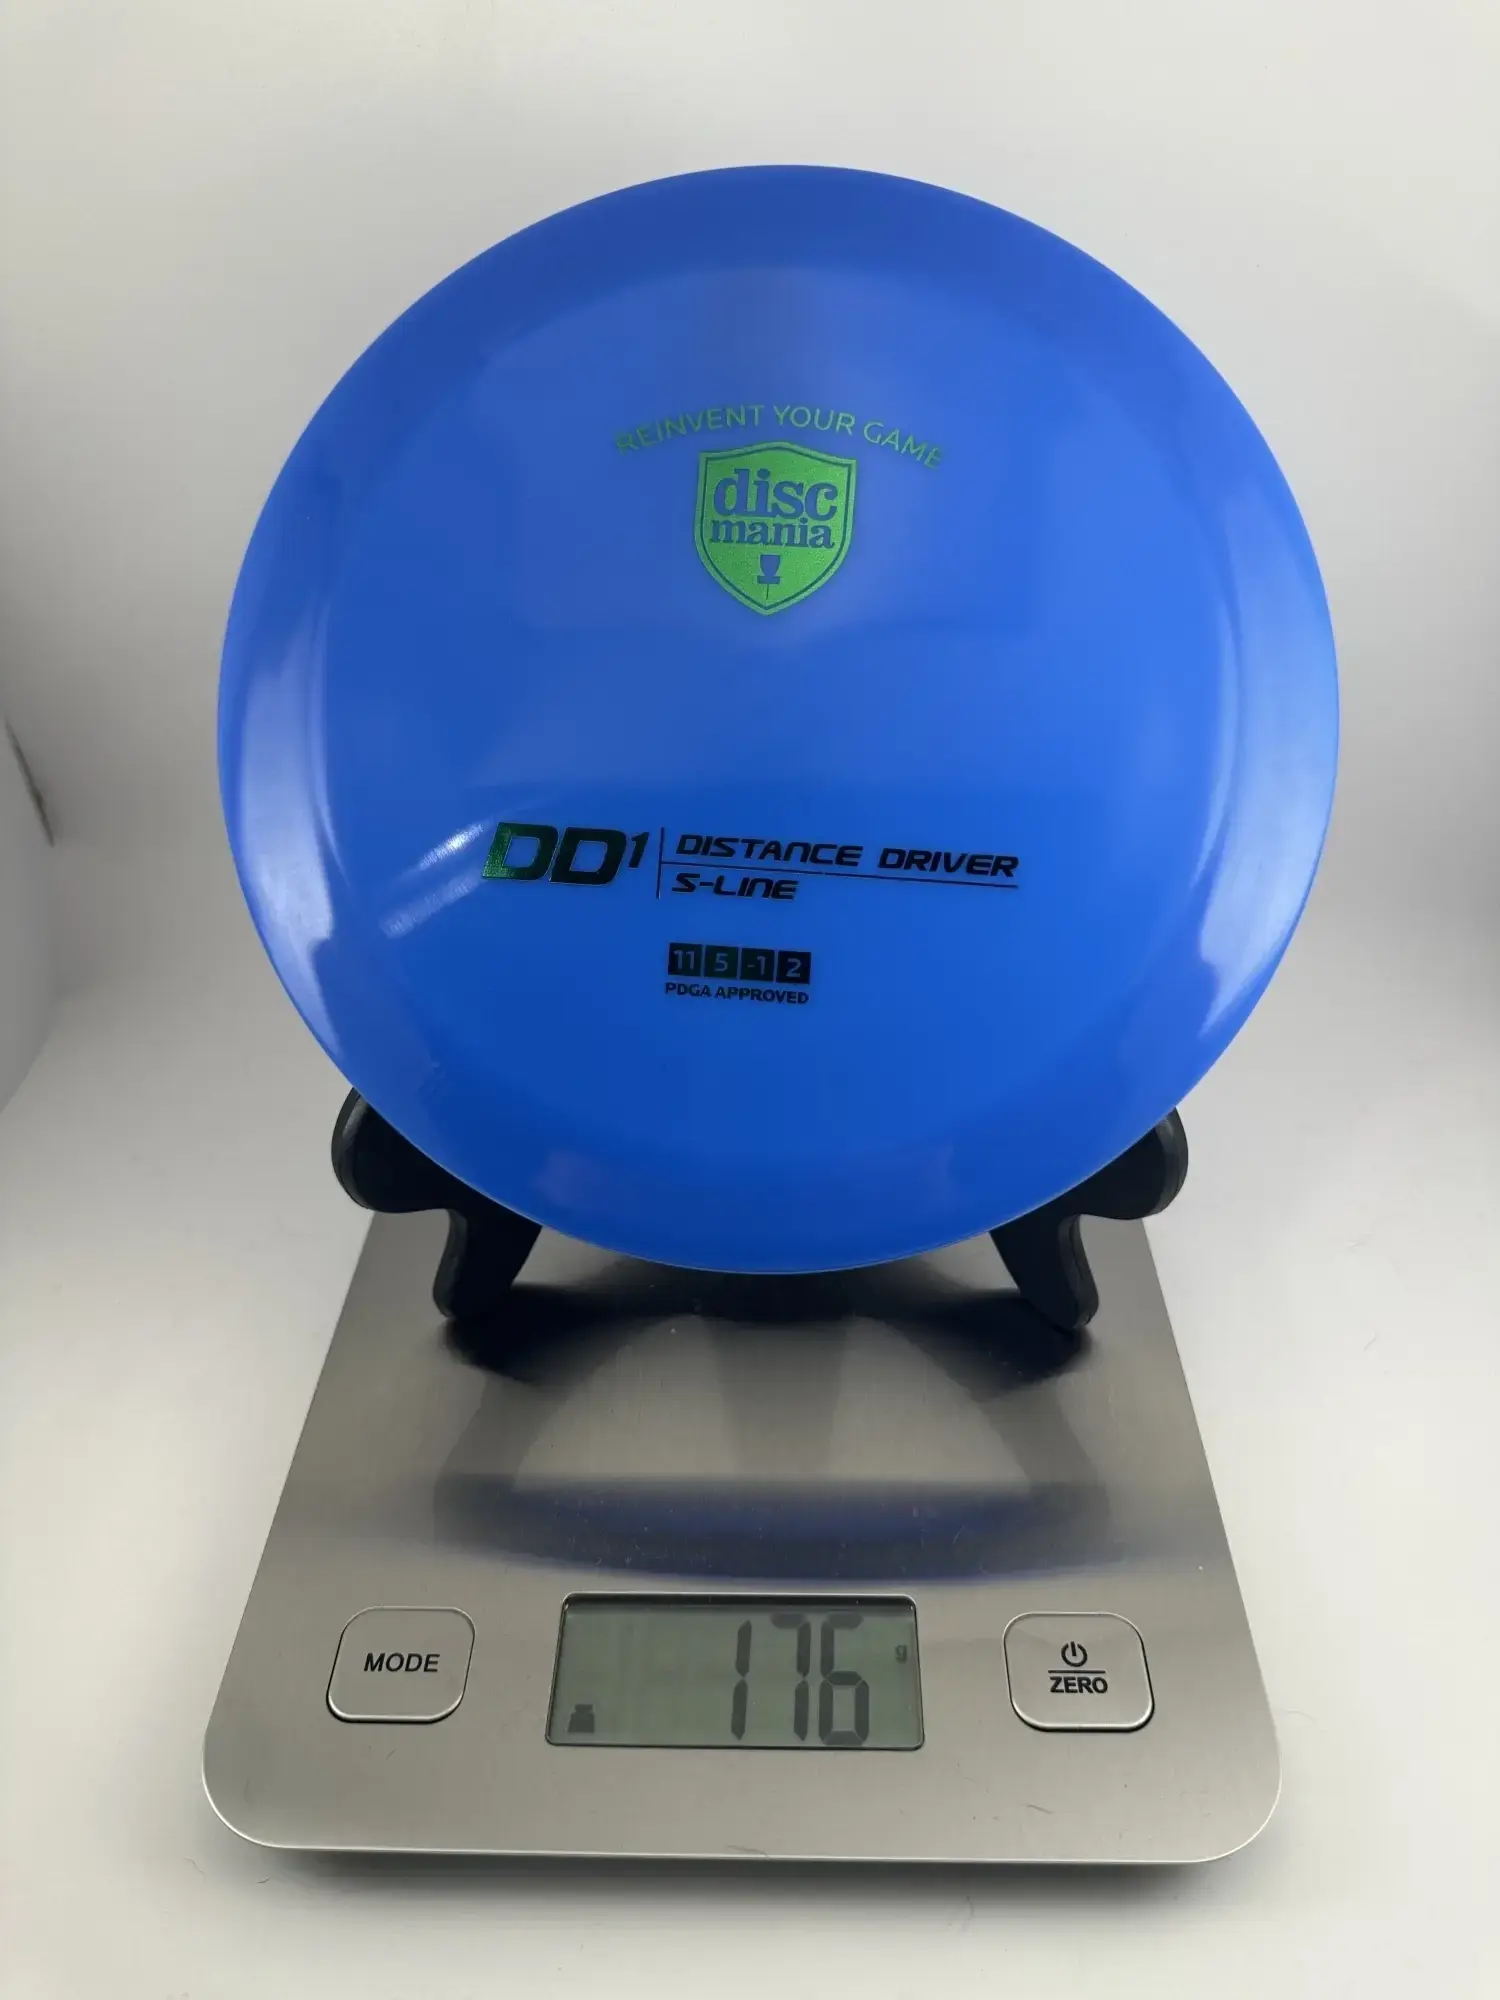 products Discmania DD1 Distance Driver S-Line